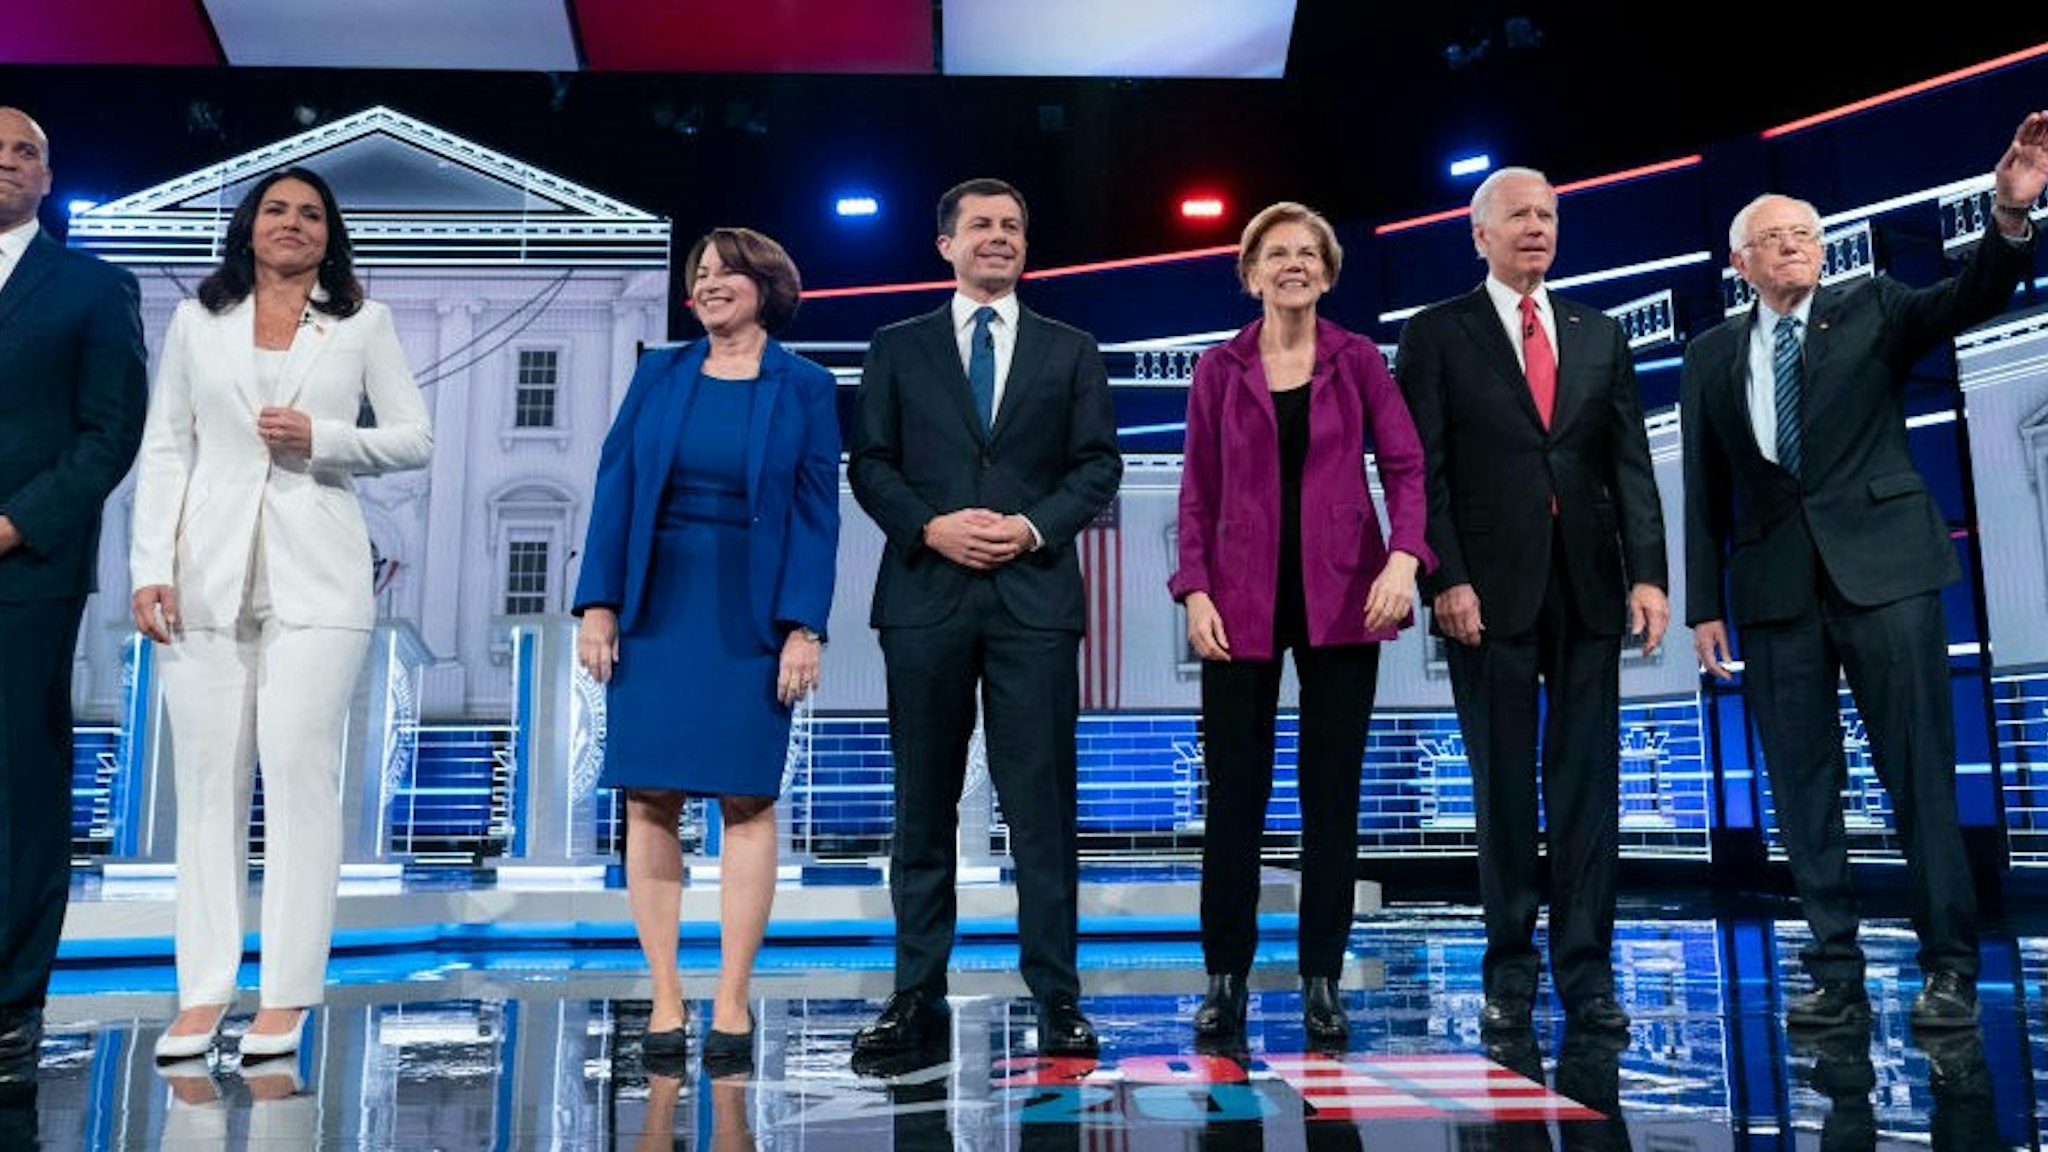 ATLANTA, GEORGIA - NOVEMBER 20: Presidential candidates Sen. Cory Booker (D-N.J.), Rep. Tulsi Gabbard (D-Hawaii), Sen. Amy Klobuchar (D-Minn.), South Bend, Ind., Mayor Pete Buttigieg, Sen. Elizabeth Warren (D-Mass.), Former vice president Joe Biden, and Sen. Bernie Sanders (I-Vt.) appear on stage at the start of he Democratic presidential debate at Tyler Perry Studios on Wednesday, November 20, 2019, in Atlanta, Georgia. The 10 qualifying candidates participated in the campaign seasons fifth debate, hosted by The Washington Post via Getty Images and MSNBC.(Photo by